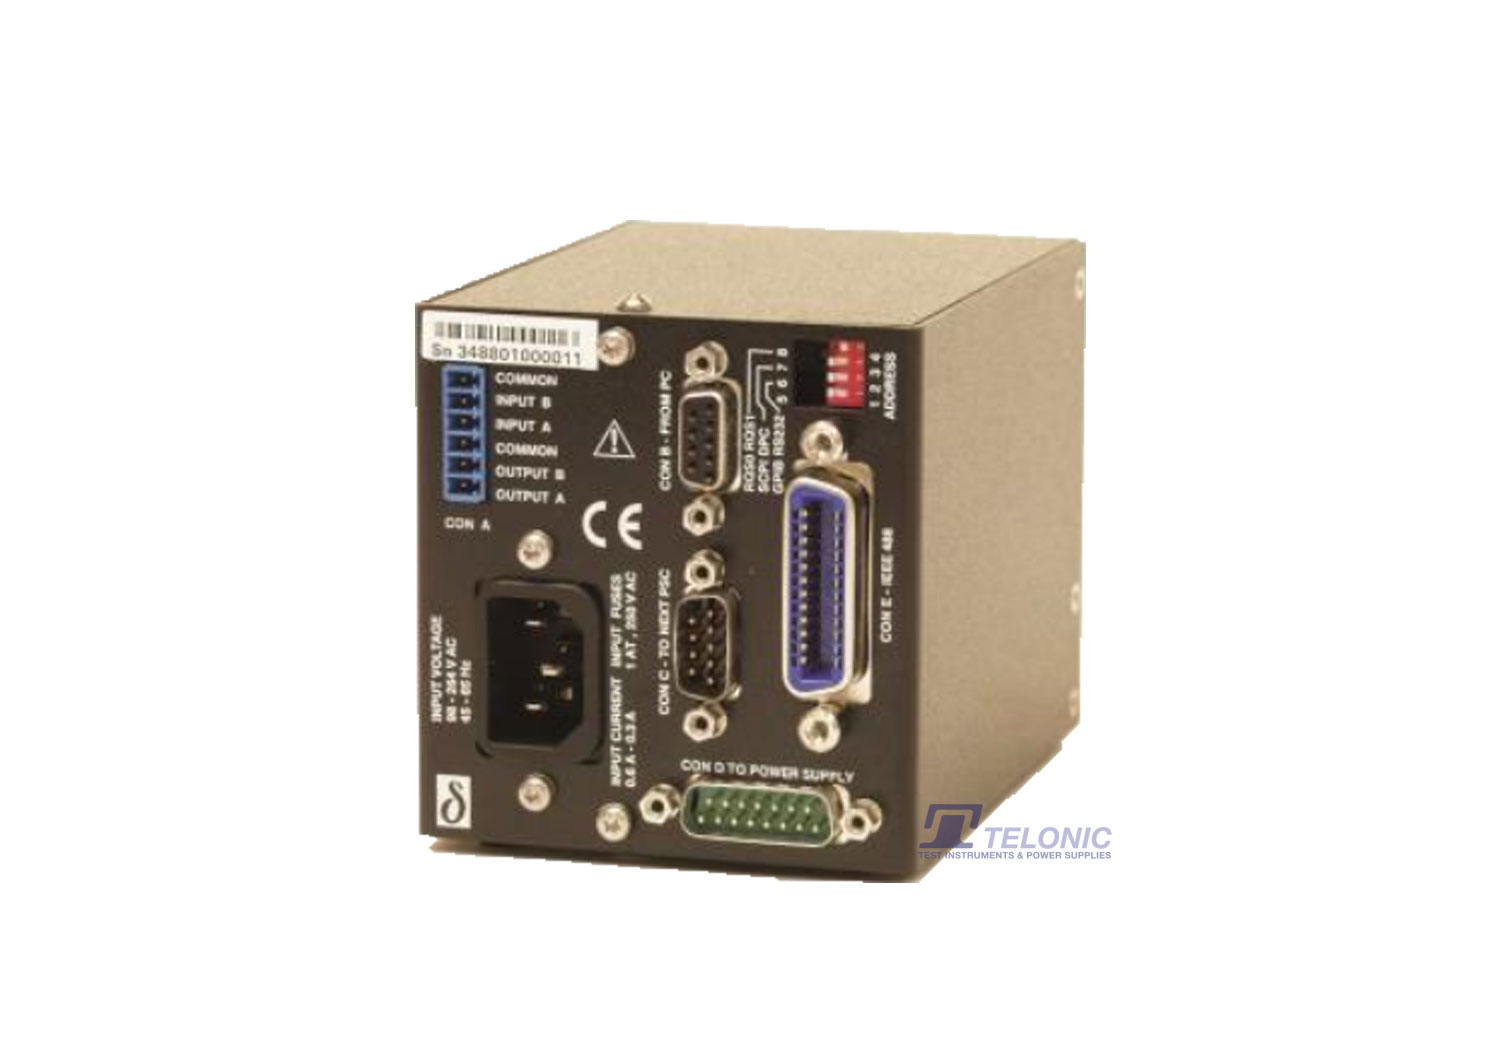 Connect To Analogue, PSC-232, RS232 Serial Interface External Option For SM1500 Series